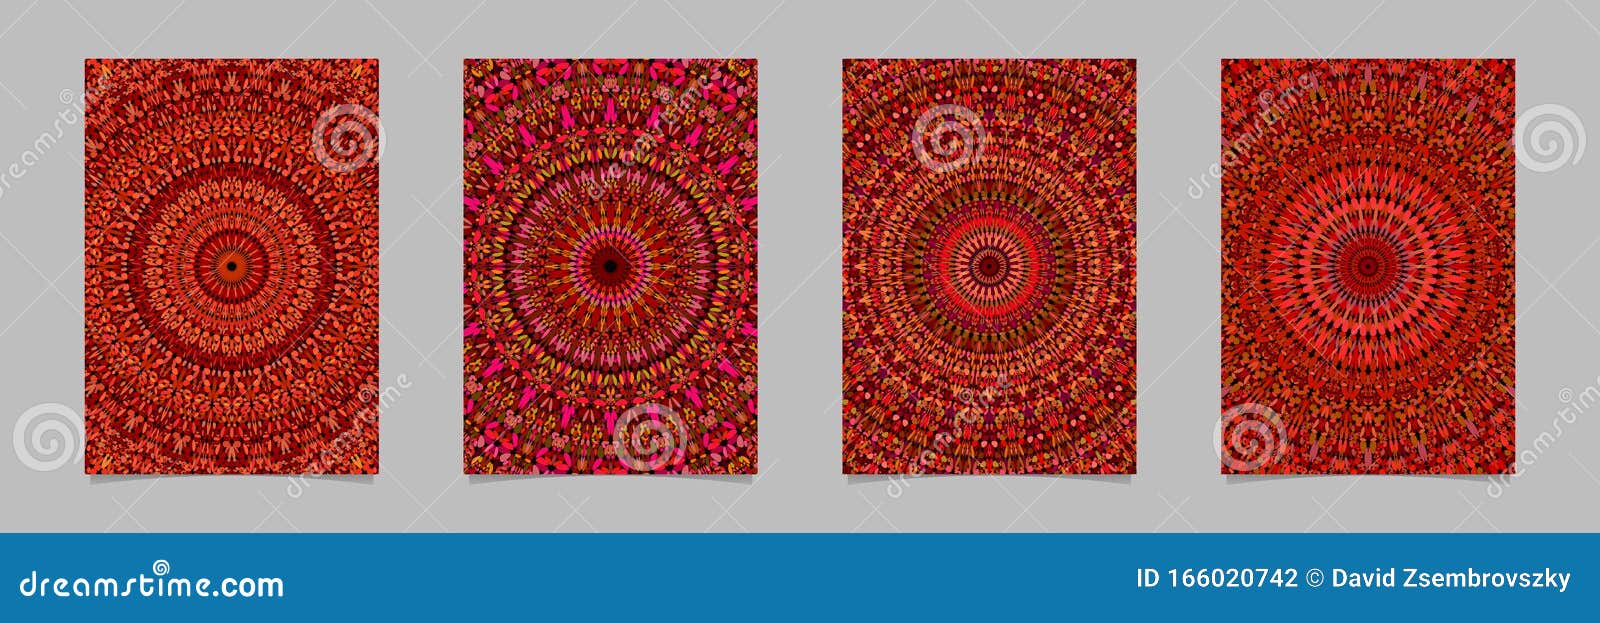 Red abstract petal kaleidoscope mandala page background template set - vector stationery designs